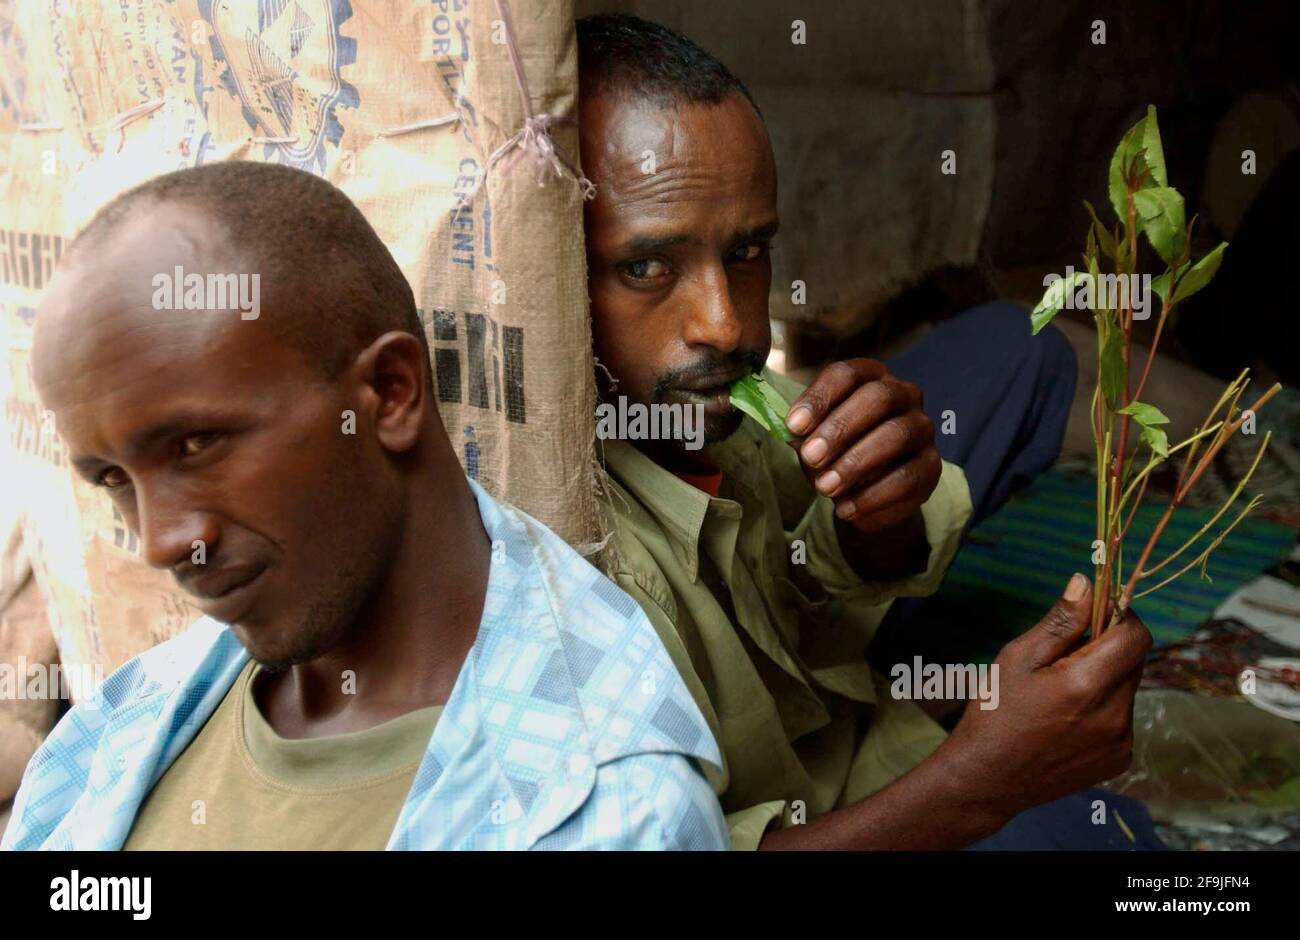 SOME MEN SPEND MUCH OF THE AFTERNOON  CHEWING KHAT  IN THE MARKET PLACE IN HARGEISA,THE CAPITAL OF SOMALILAND.30/6/05. TOM PILSTON Stock Photo